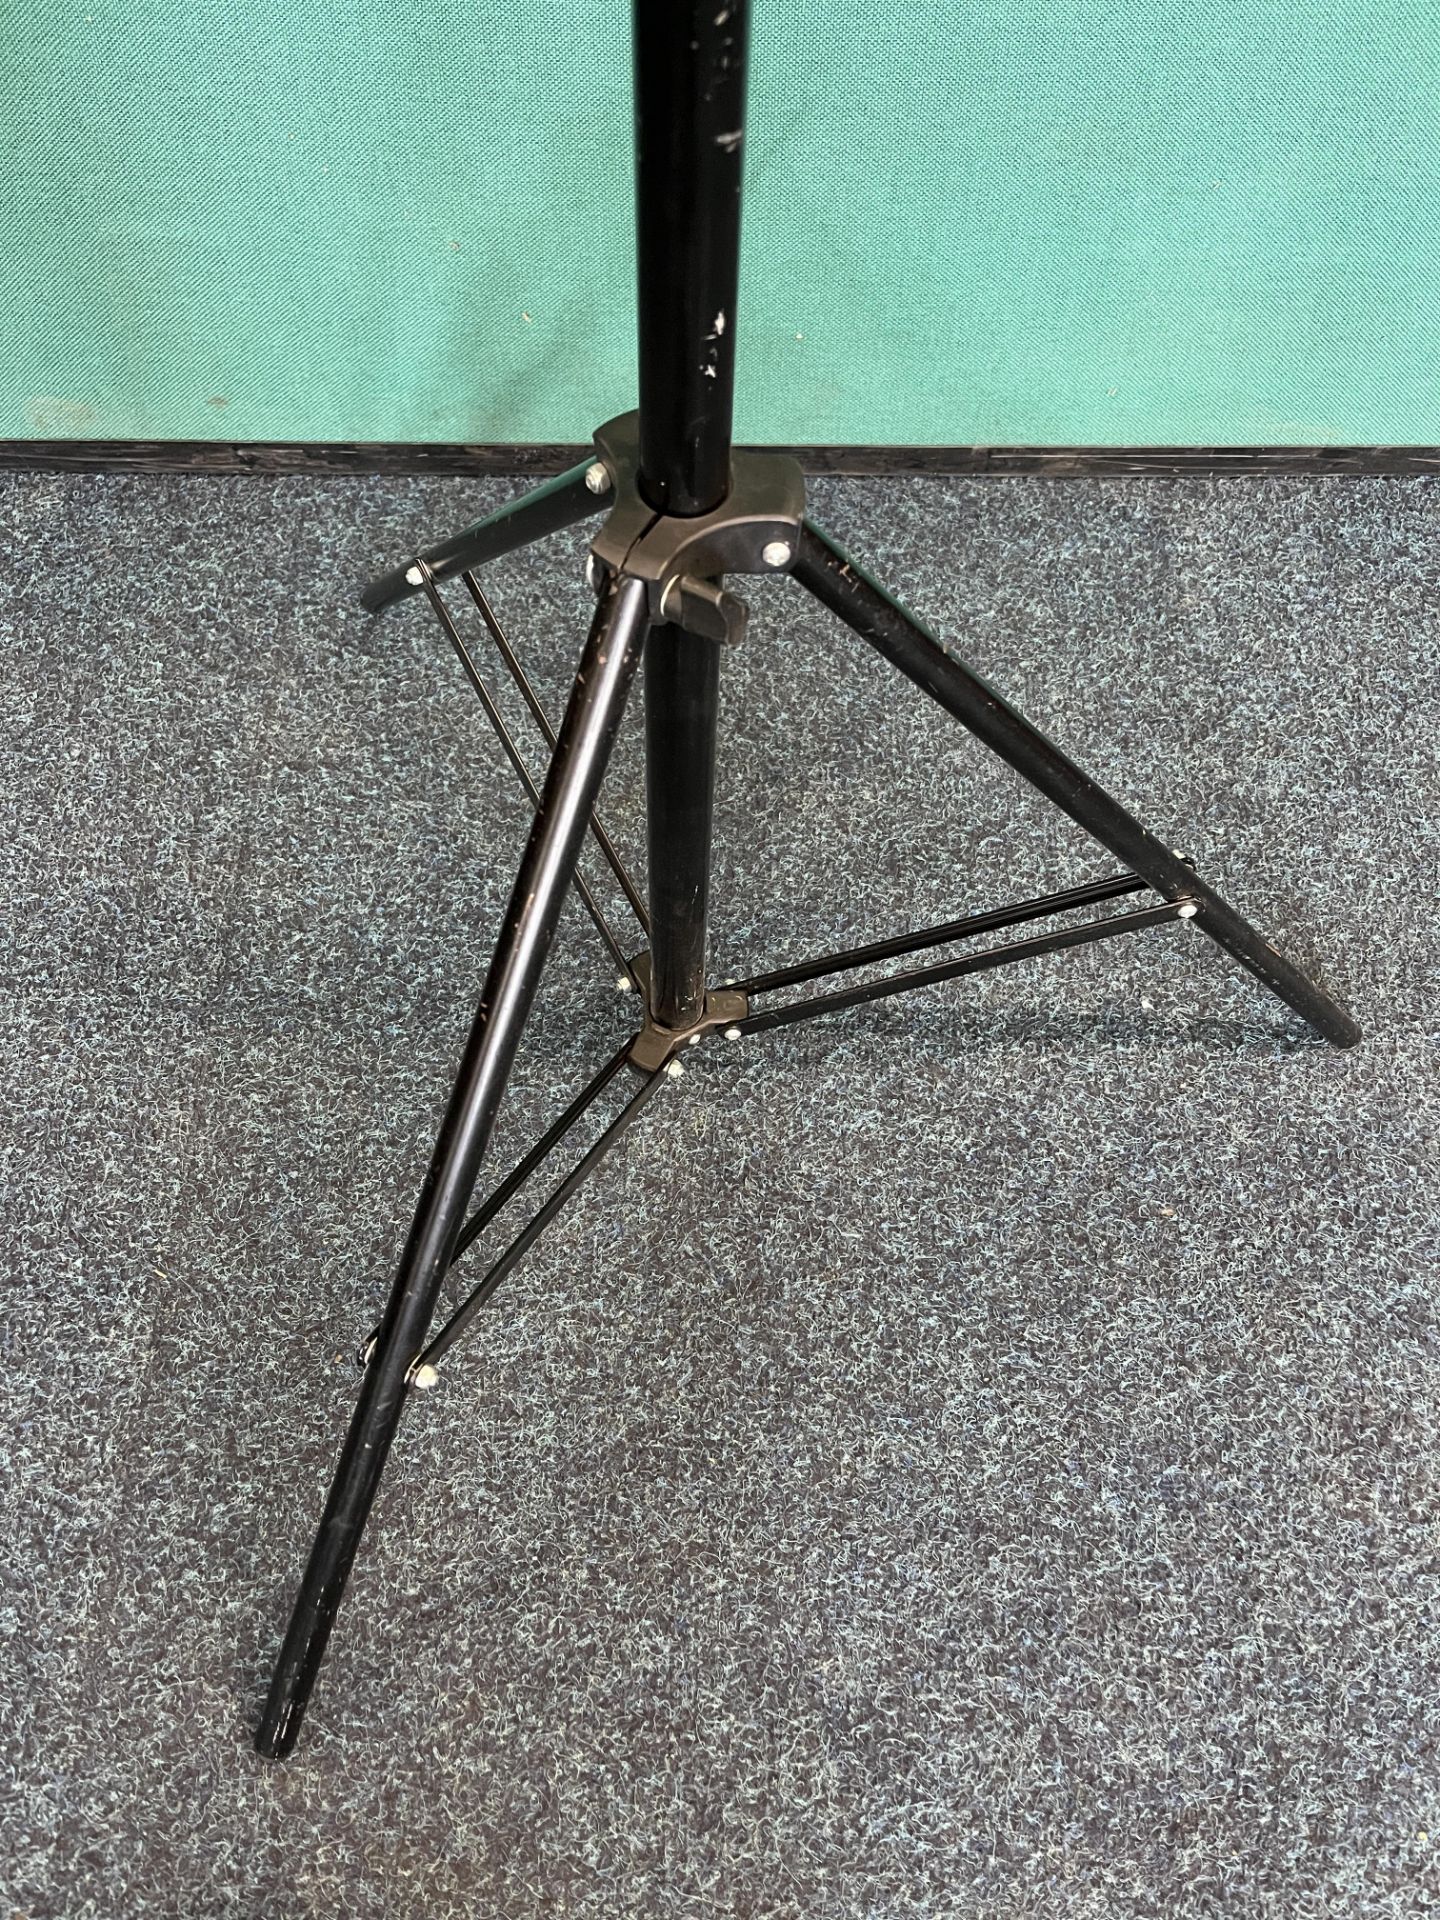 2 x Camera Tripods - As pictured - Image 5 of 6